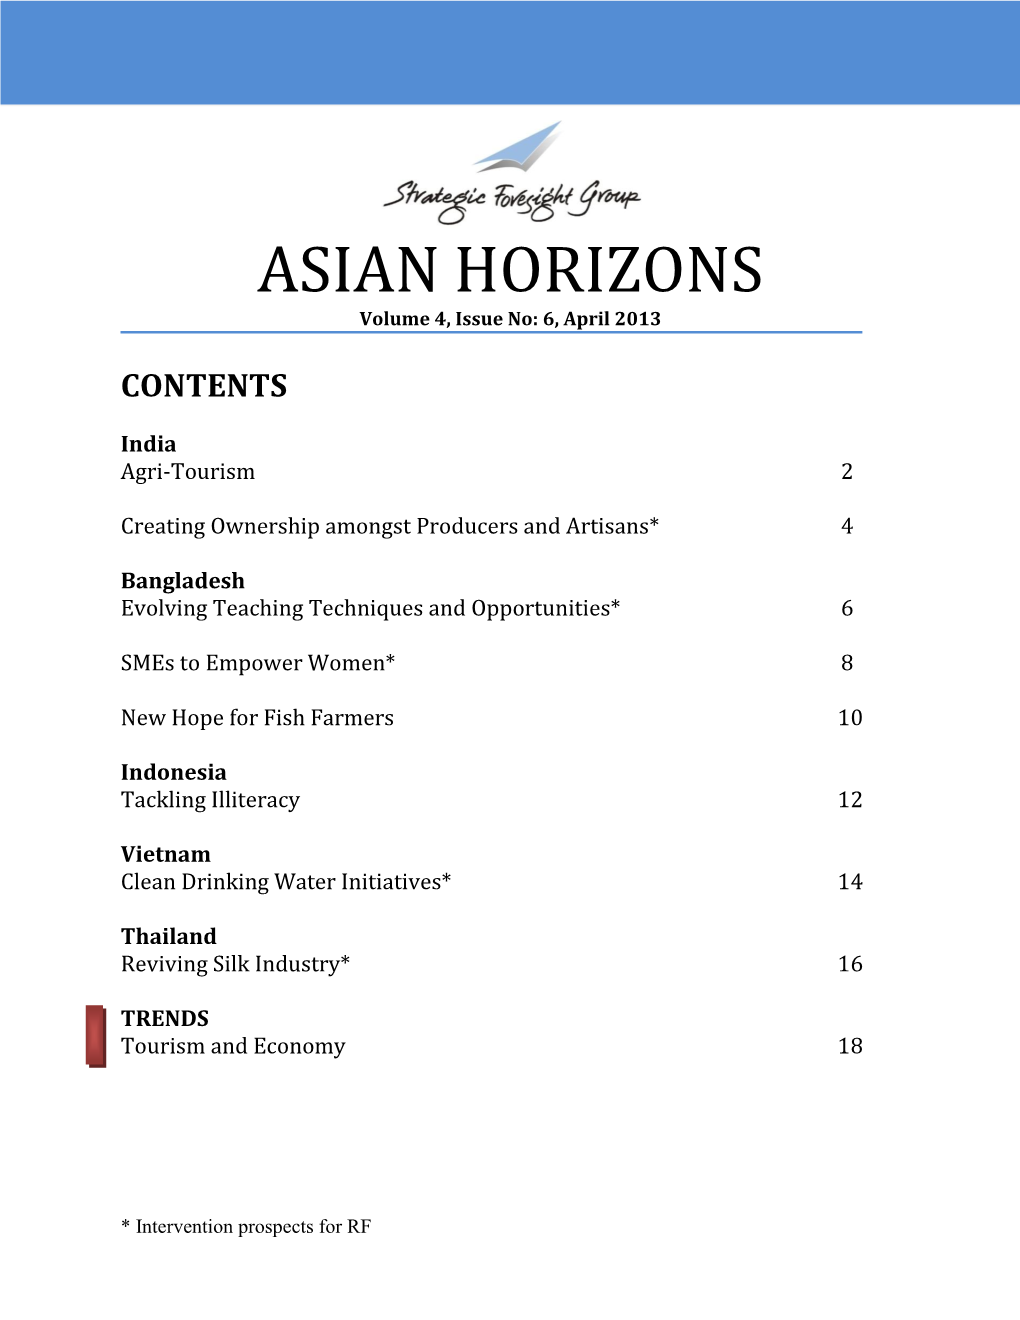 ASIAN HORIZONS Volume 4, Issue No: 6, April 2013